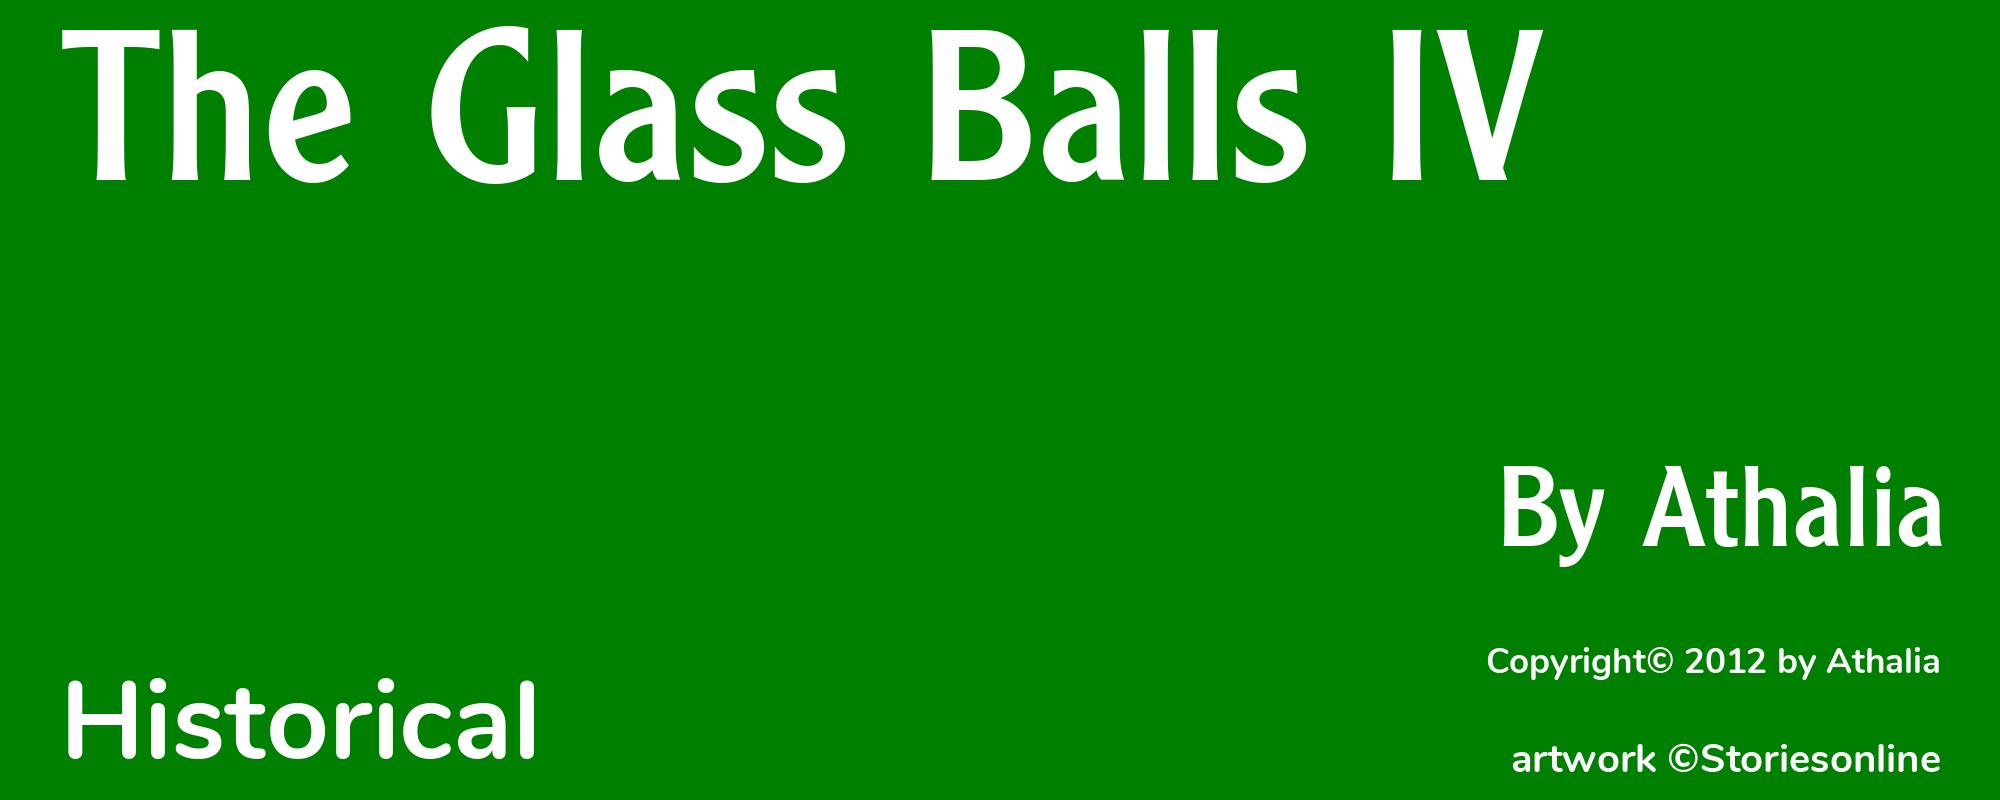 The Glass Balls IV - Cover